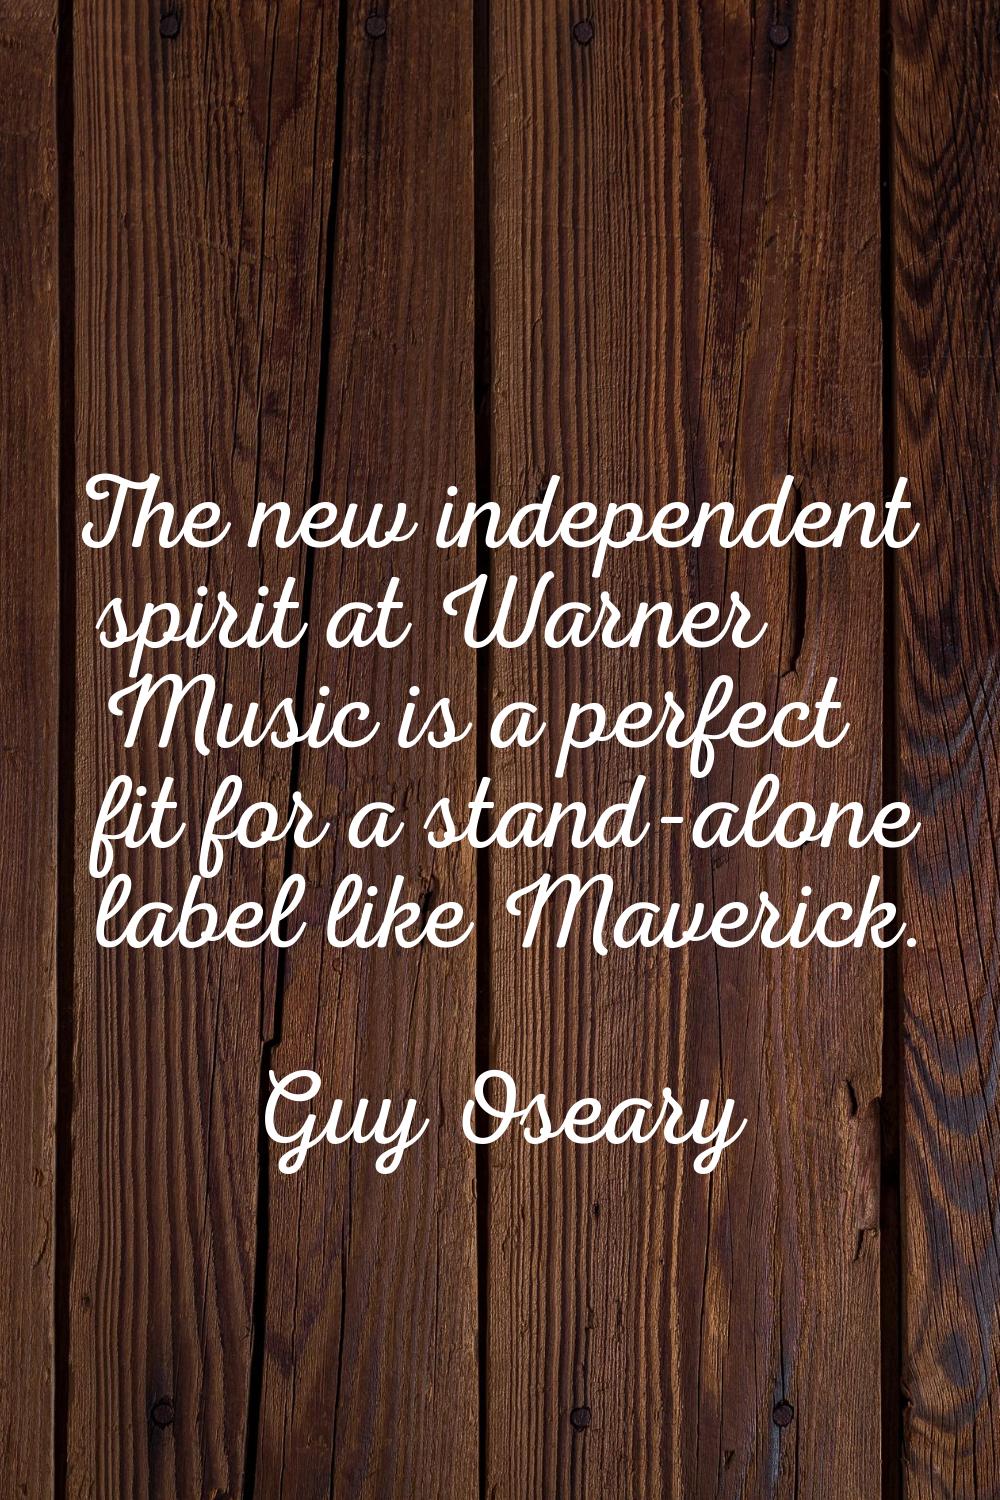 The new independent spirit at Warner Music is a perfect fit for a stand-alone label like Maverick.